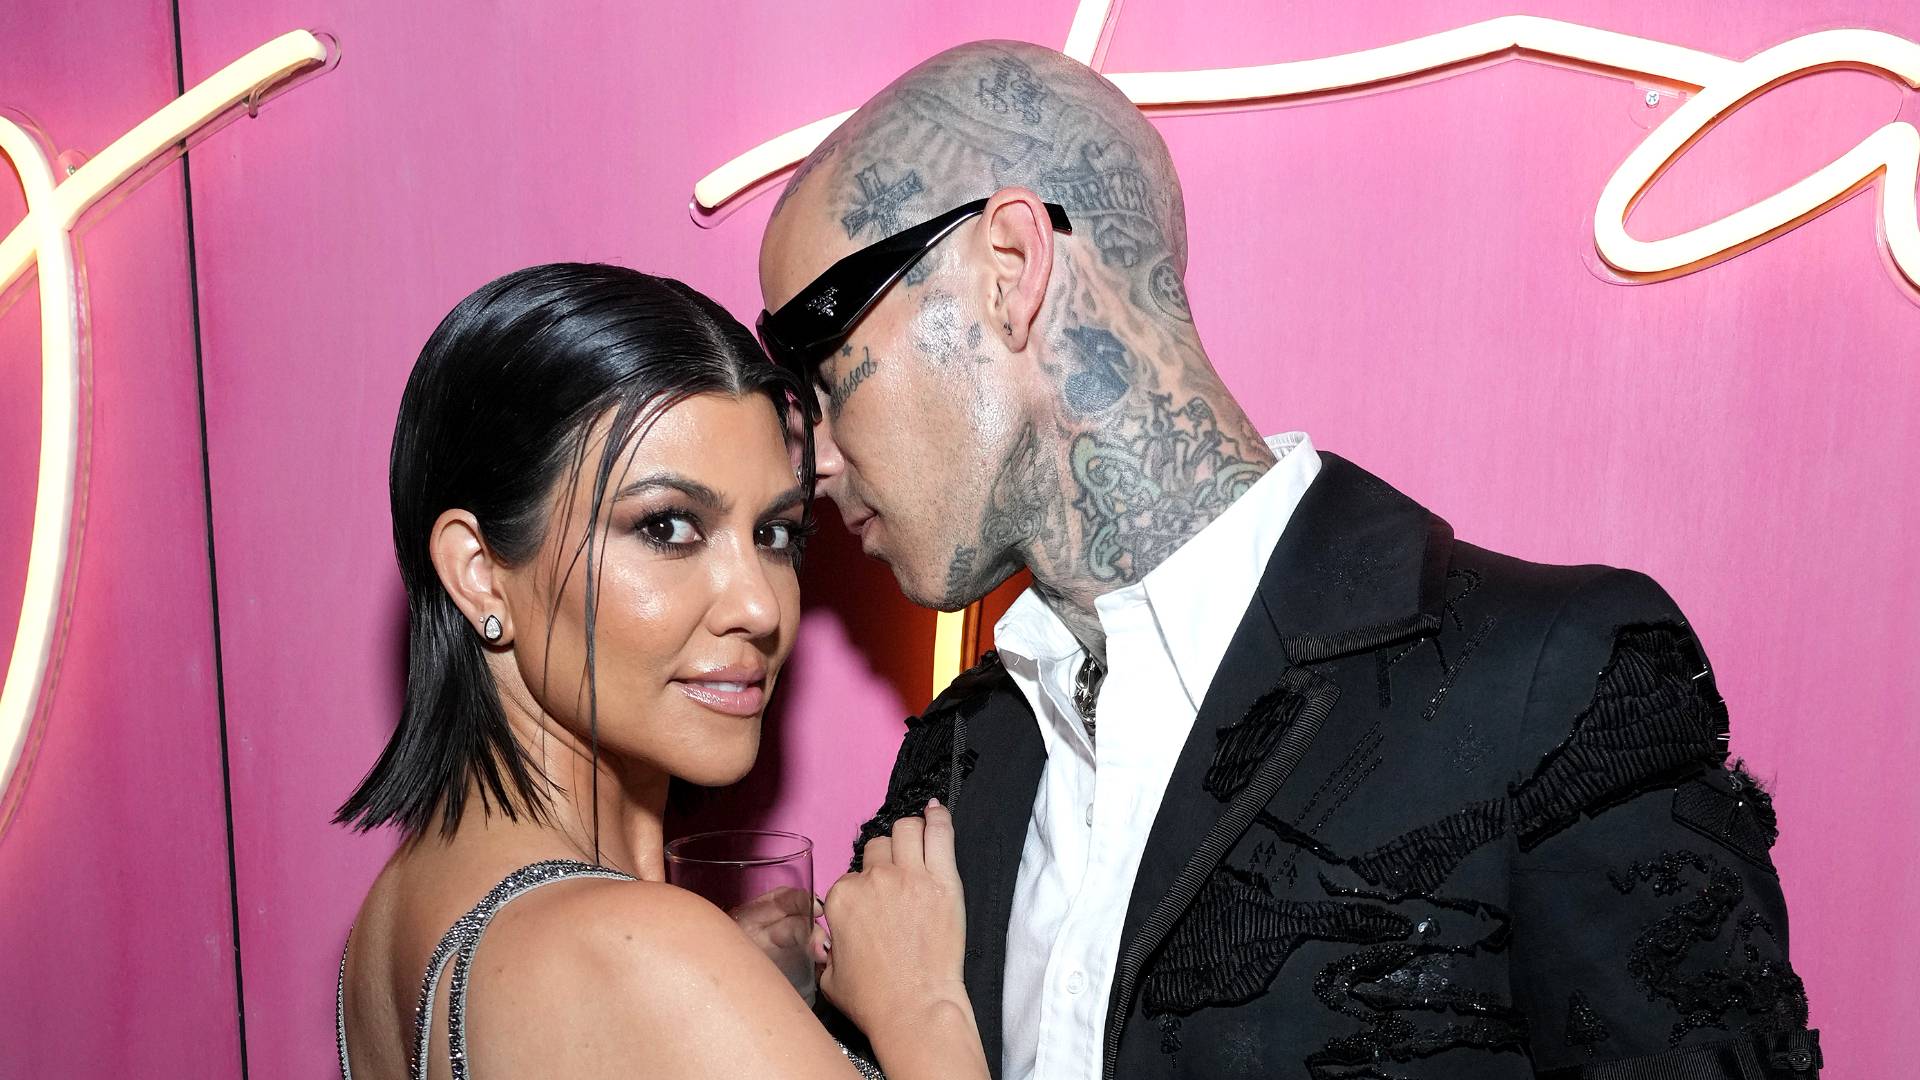 Kourtney Kardashian and Travis Barker attend the 2022 Vanity Fair Oscar Party hosted by Radhika Jones at Wallis Annenberg Center for the Performing Arts on March 27, 2022 in Beverly Hills, California. 